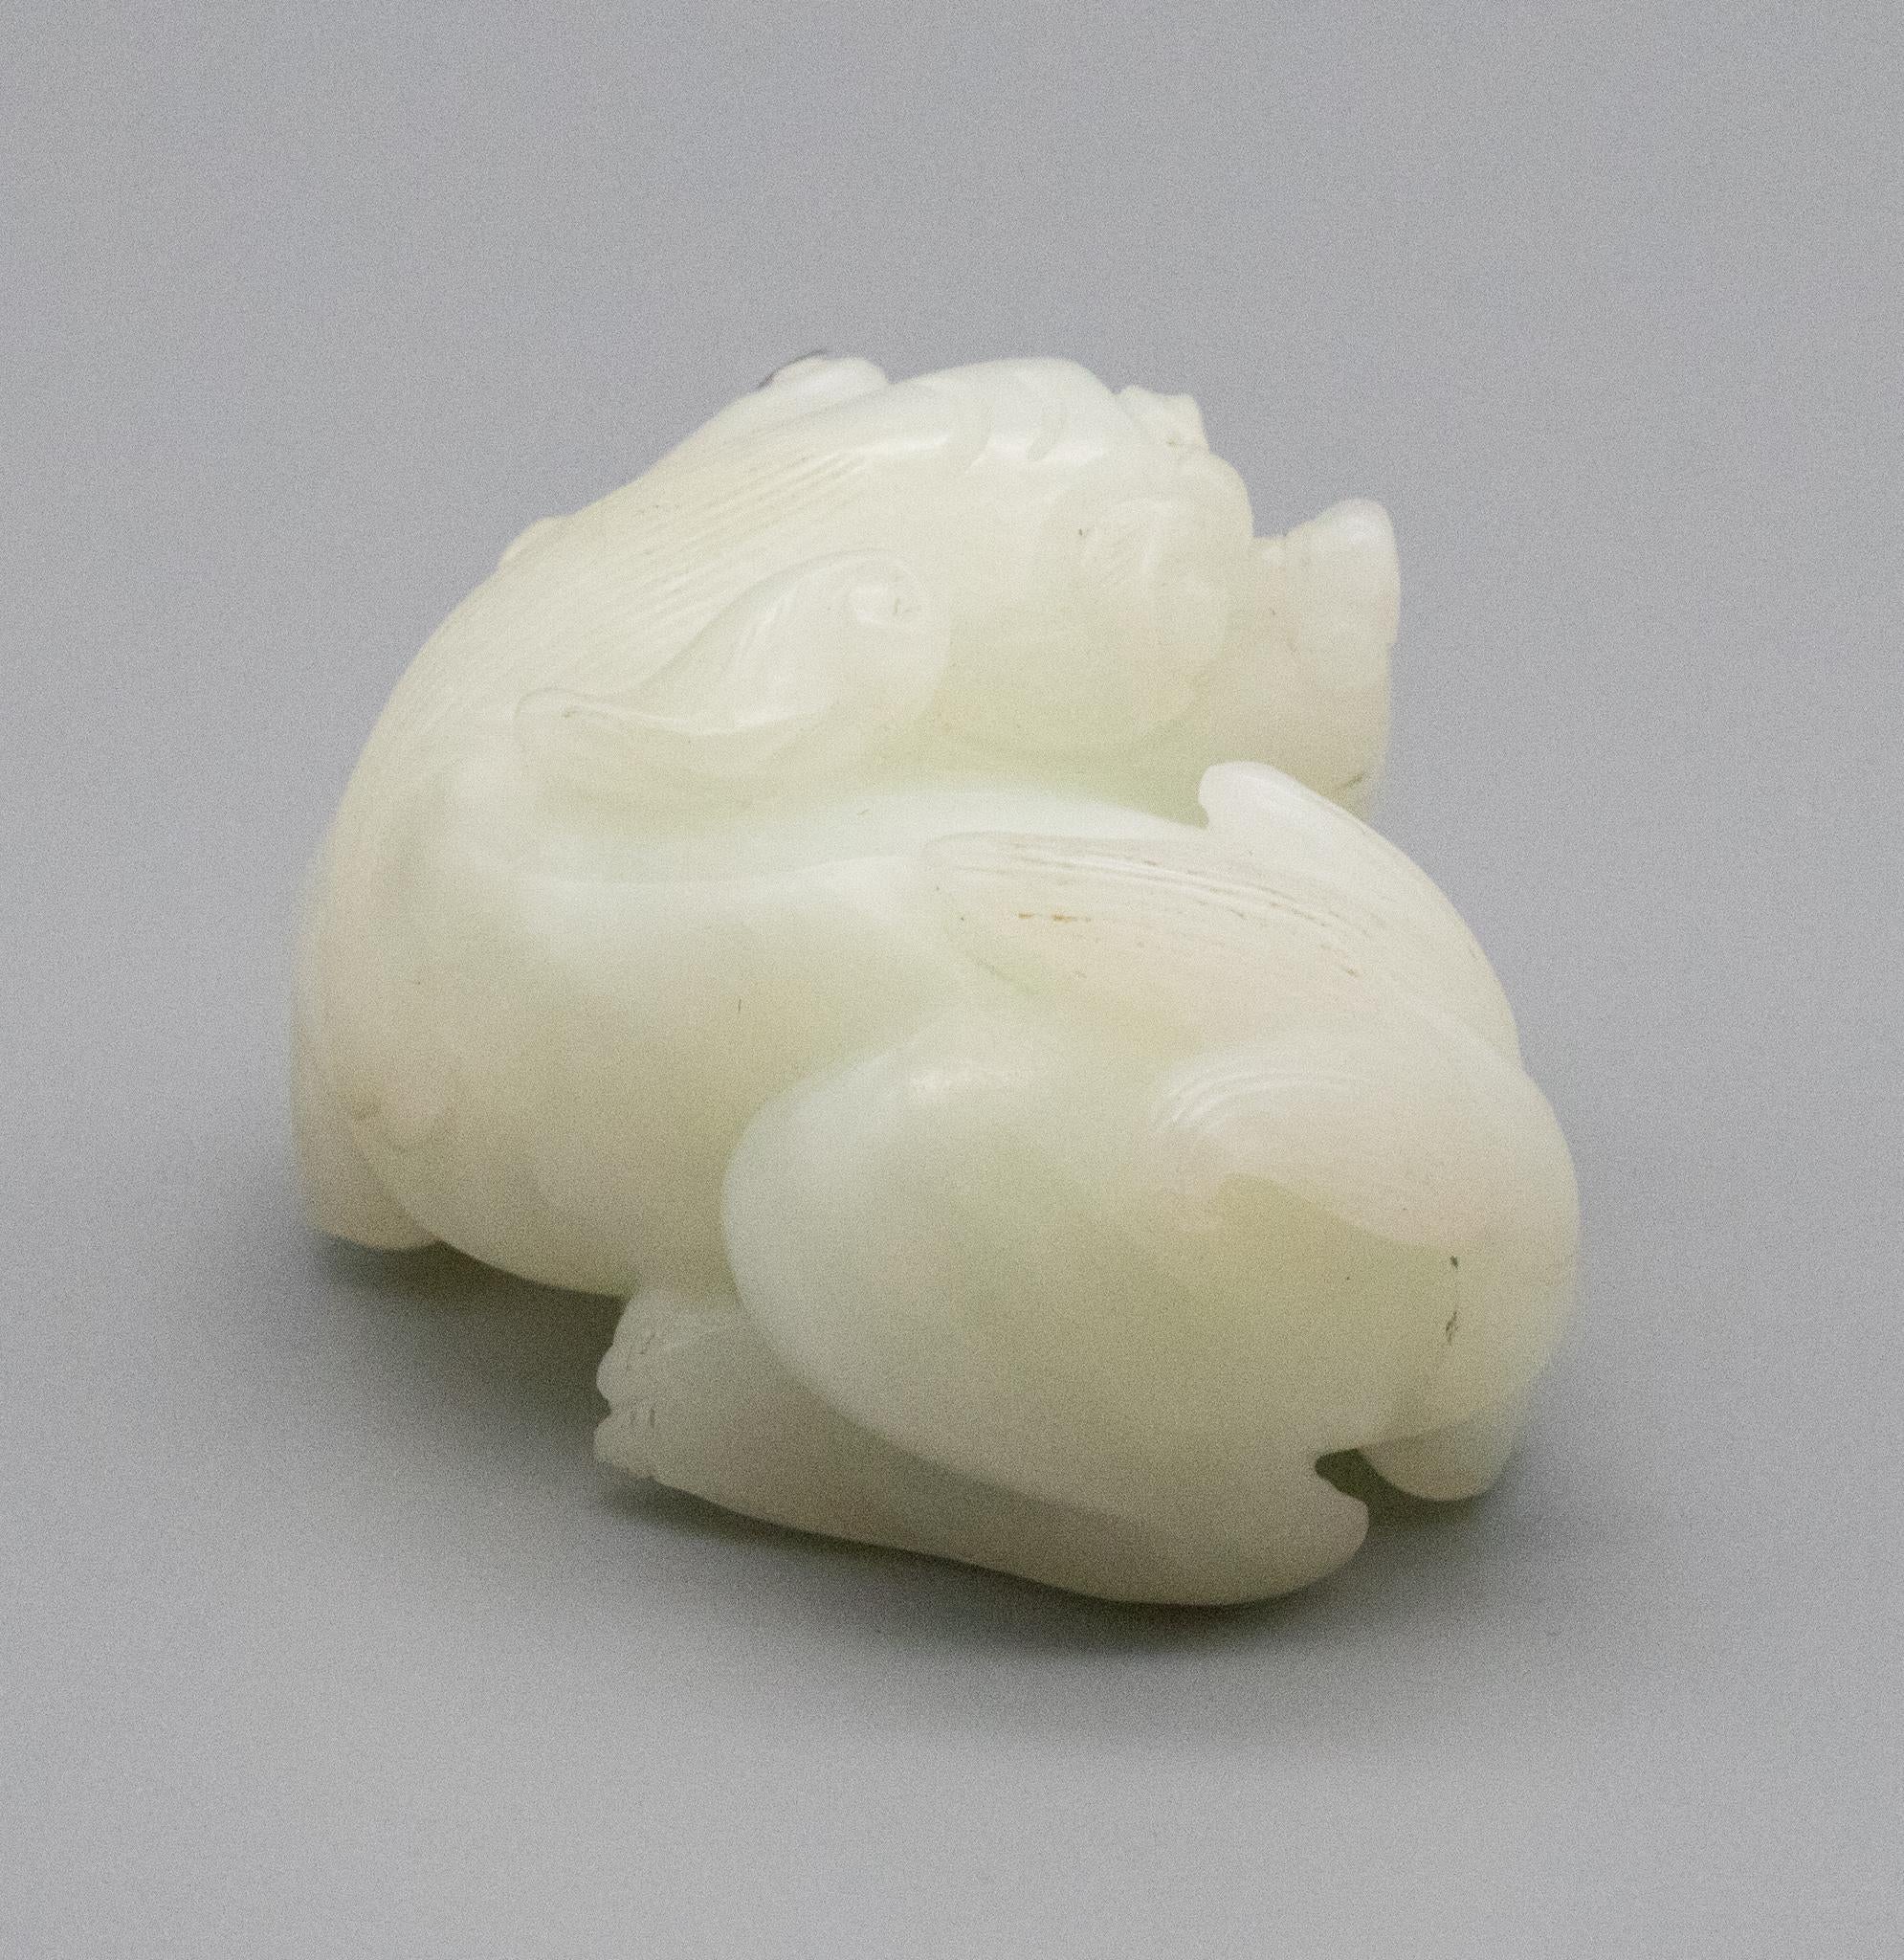 China Qing Dynasty 18th Century Reclining Foo Dog Carved in White Nephrite Jade 2